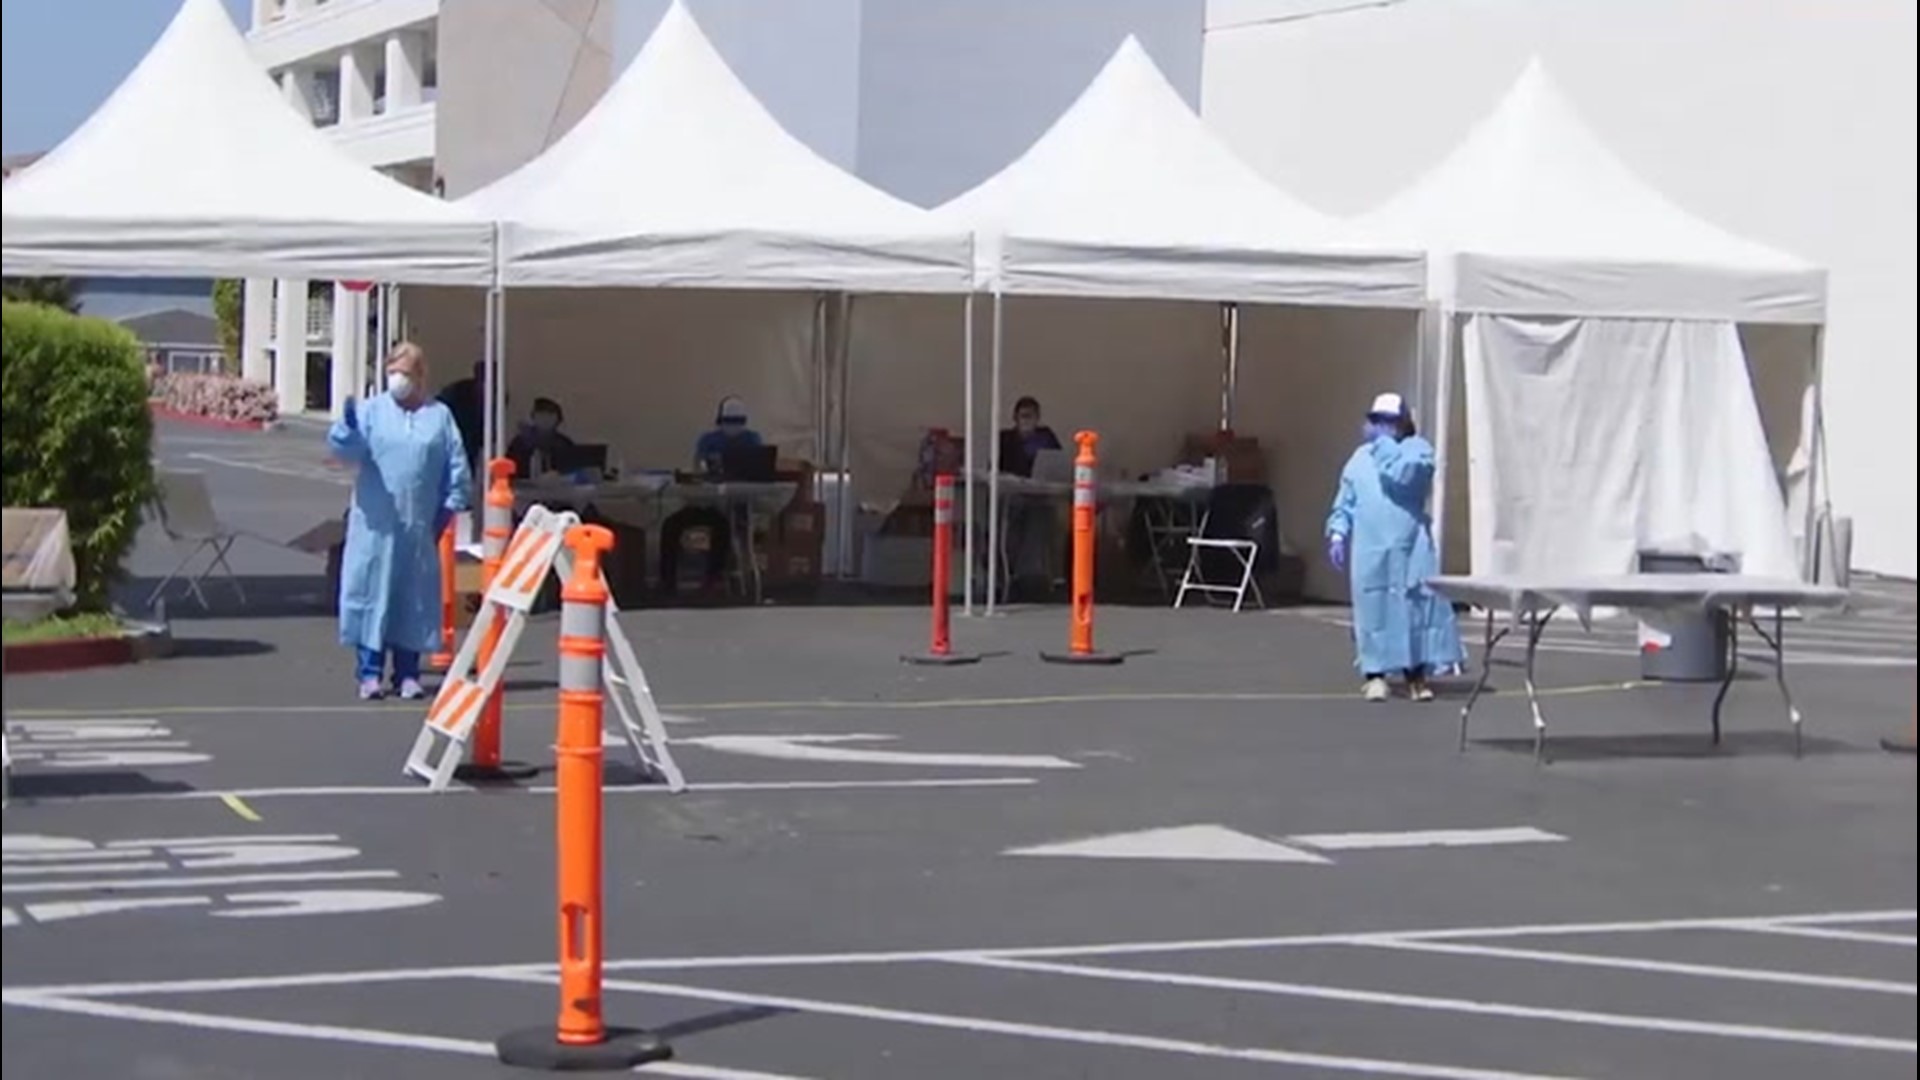 This COVID-19 testing center in Los Angeles County, California, breaks down how testing for the coronavirus via a drive-thru works on April 6.